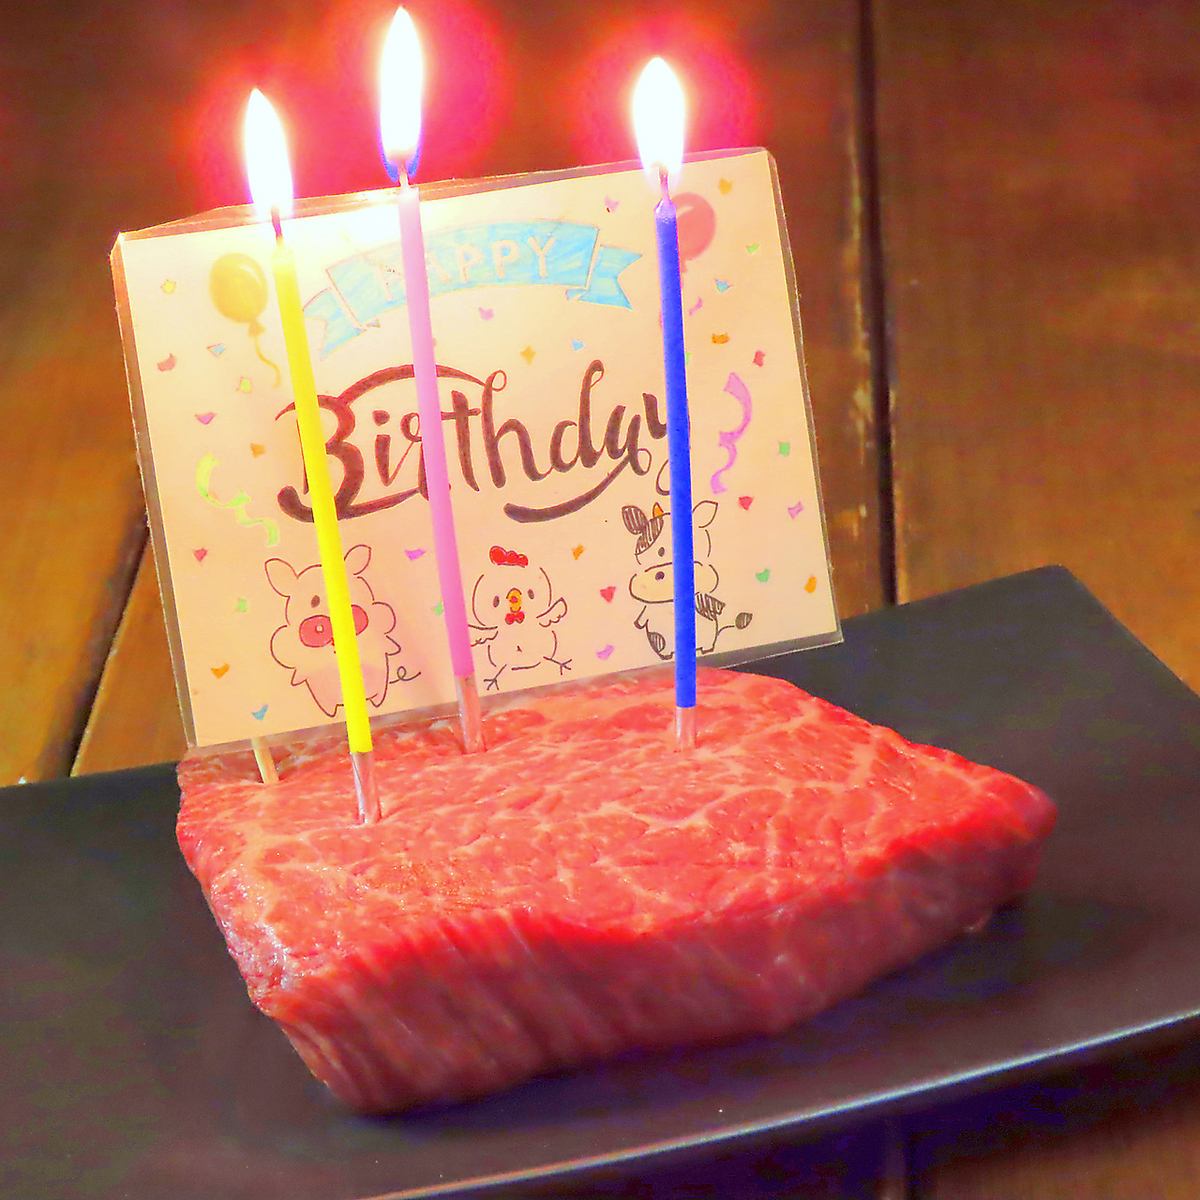 Celebrate your anniversary with special meat! We also offer meat cake service!